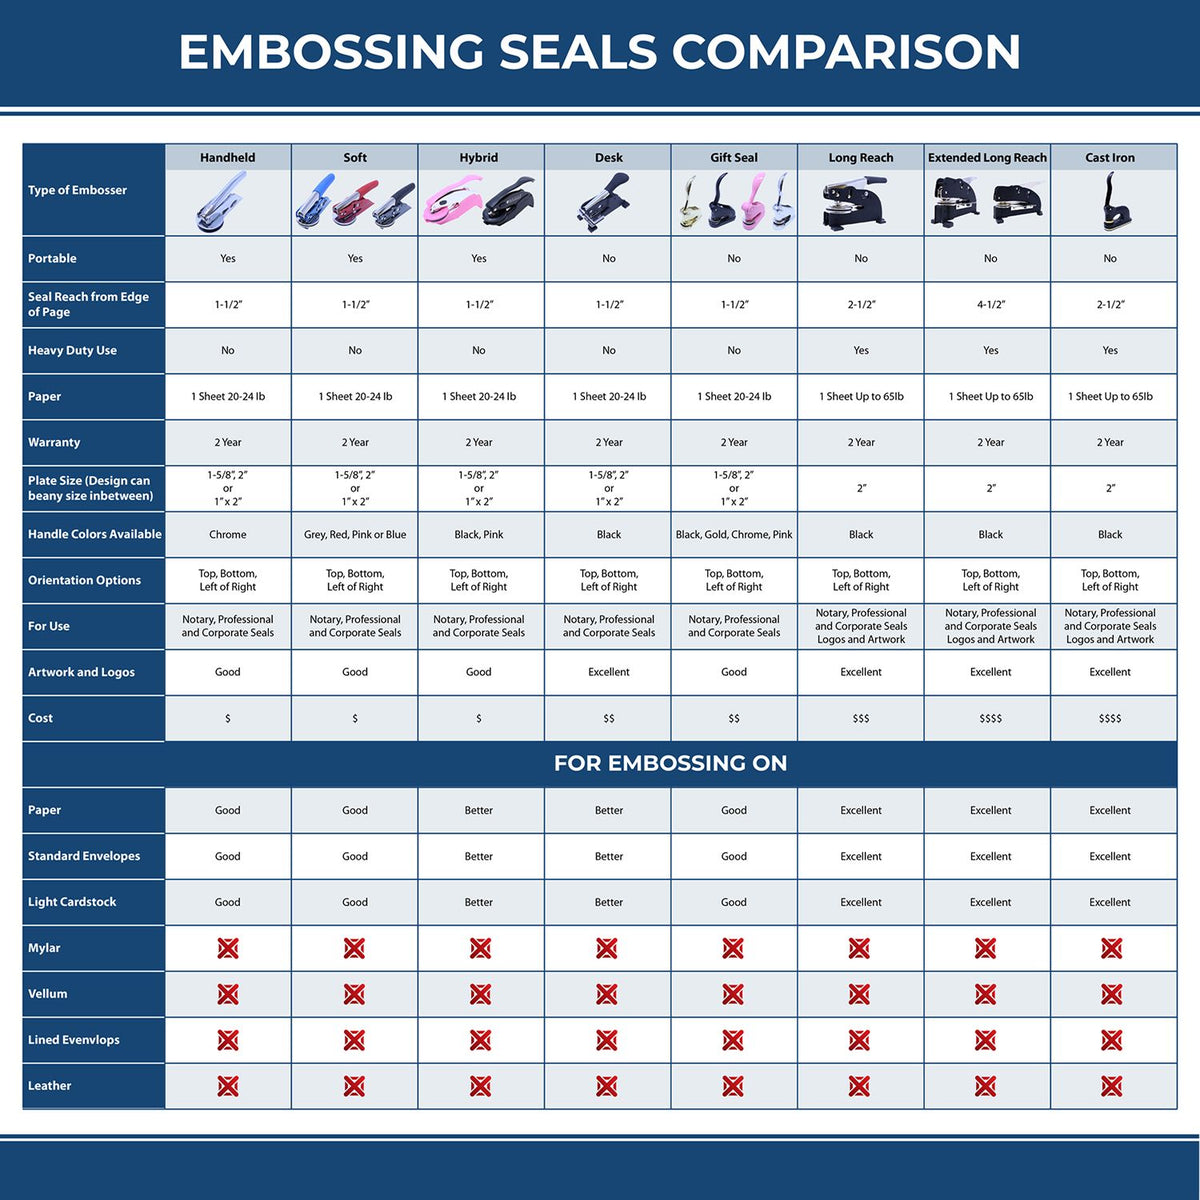 A comparison chart for the different types of mount models available for the Gift Alabama Engineer Seal